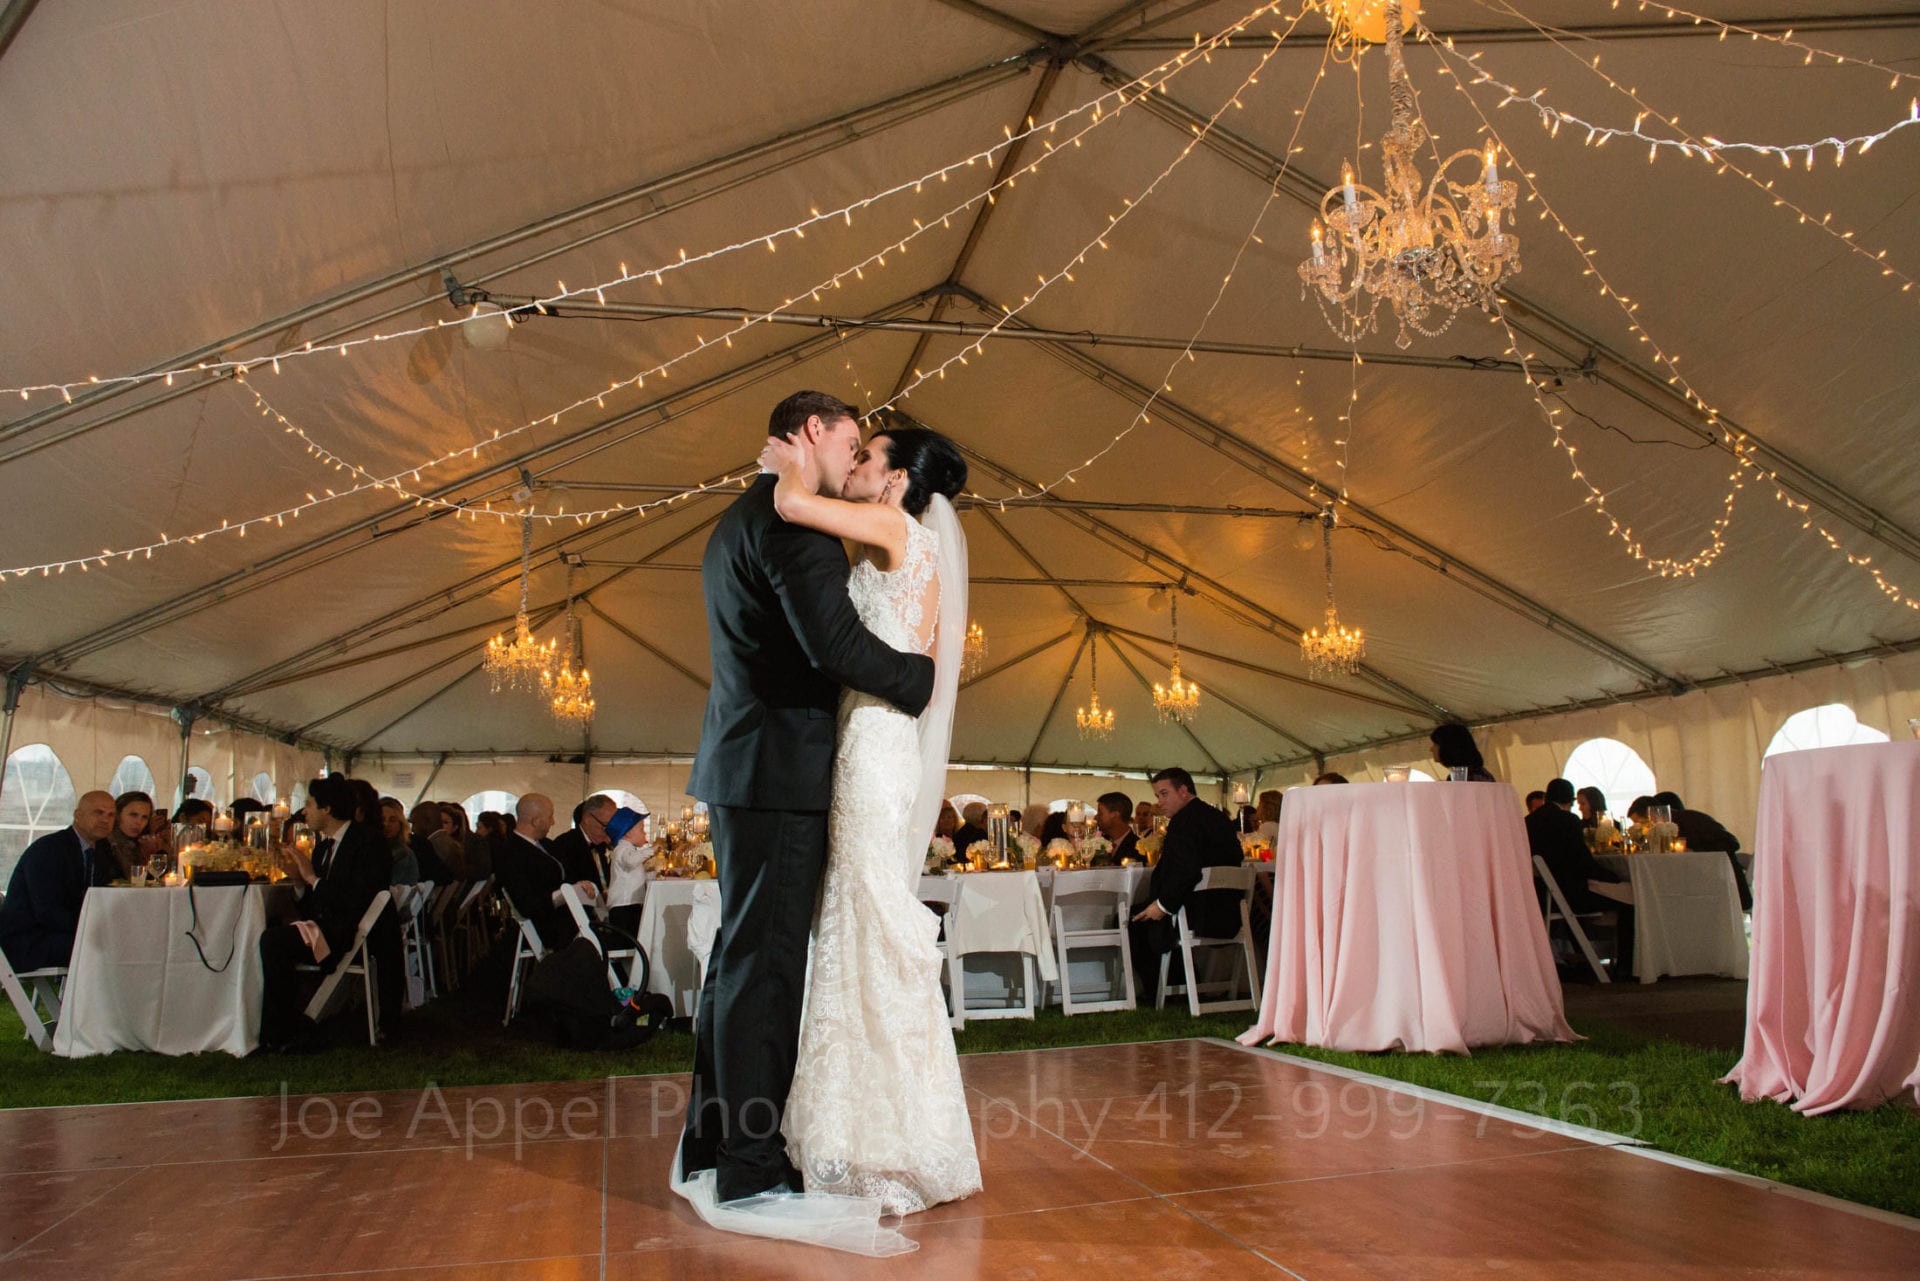 wide shot of a bride and groom dancing on a wooden floor inside of a decorated tent. Chandeliers and strings of twinkle lights illuminate.